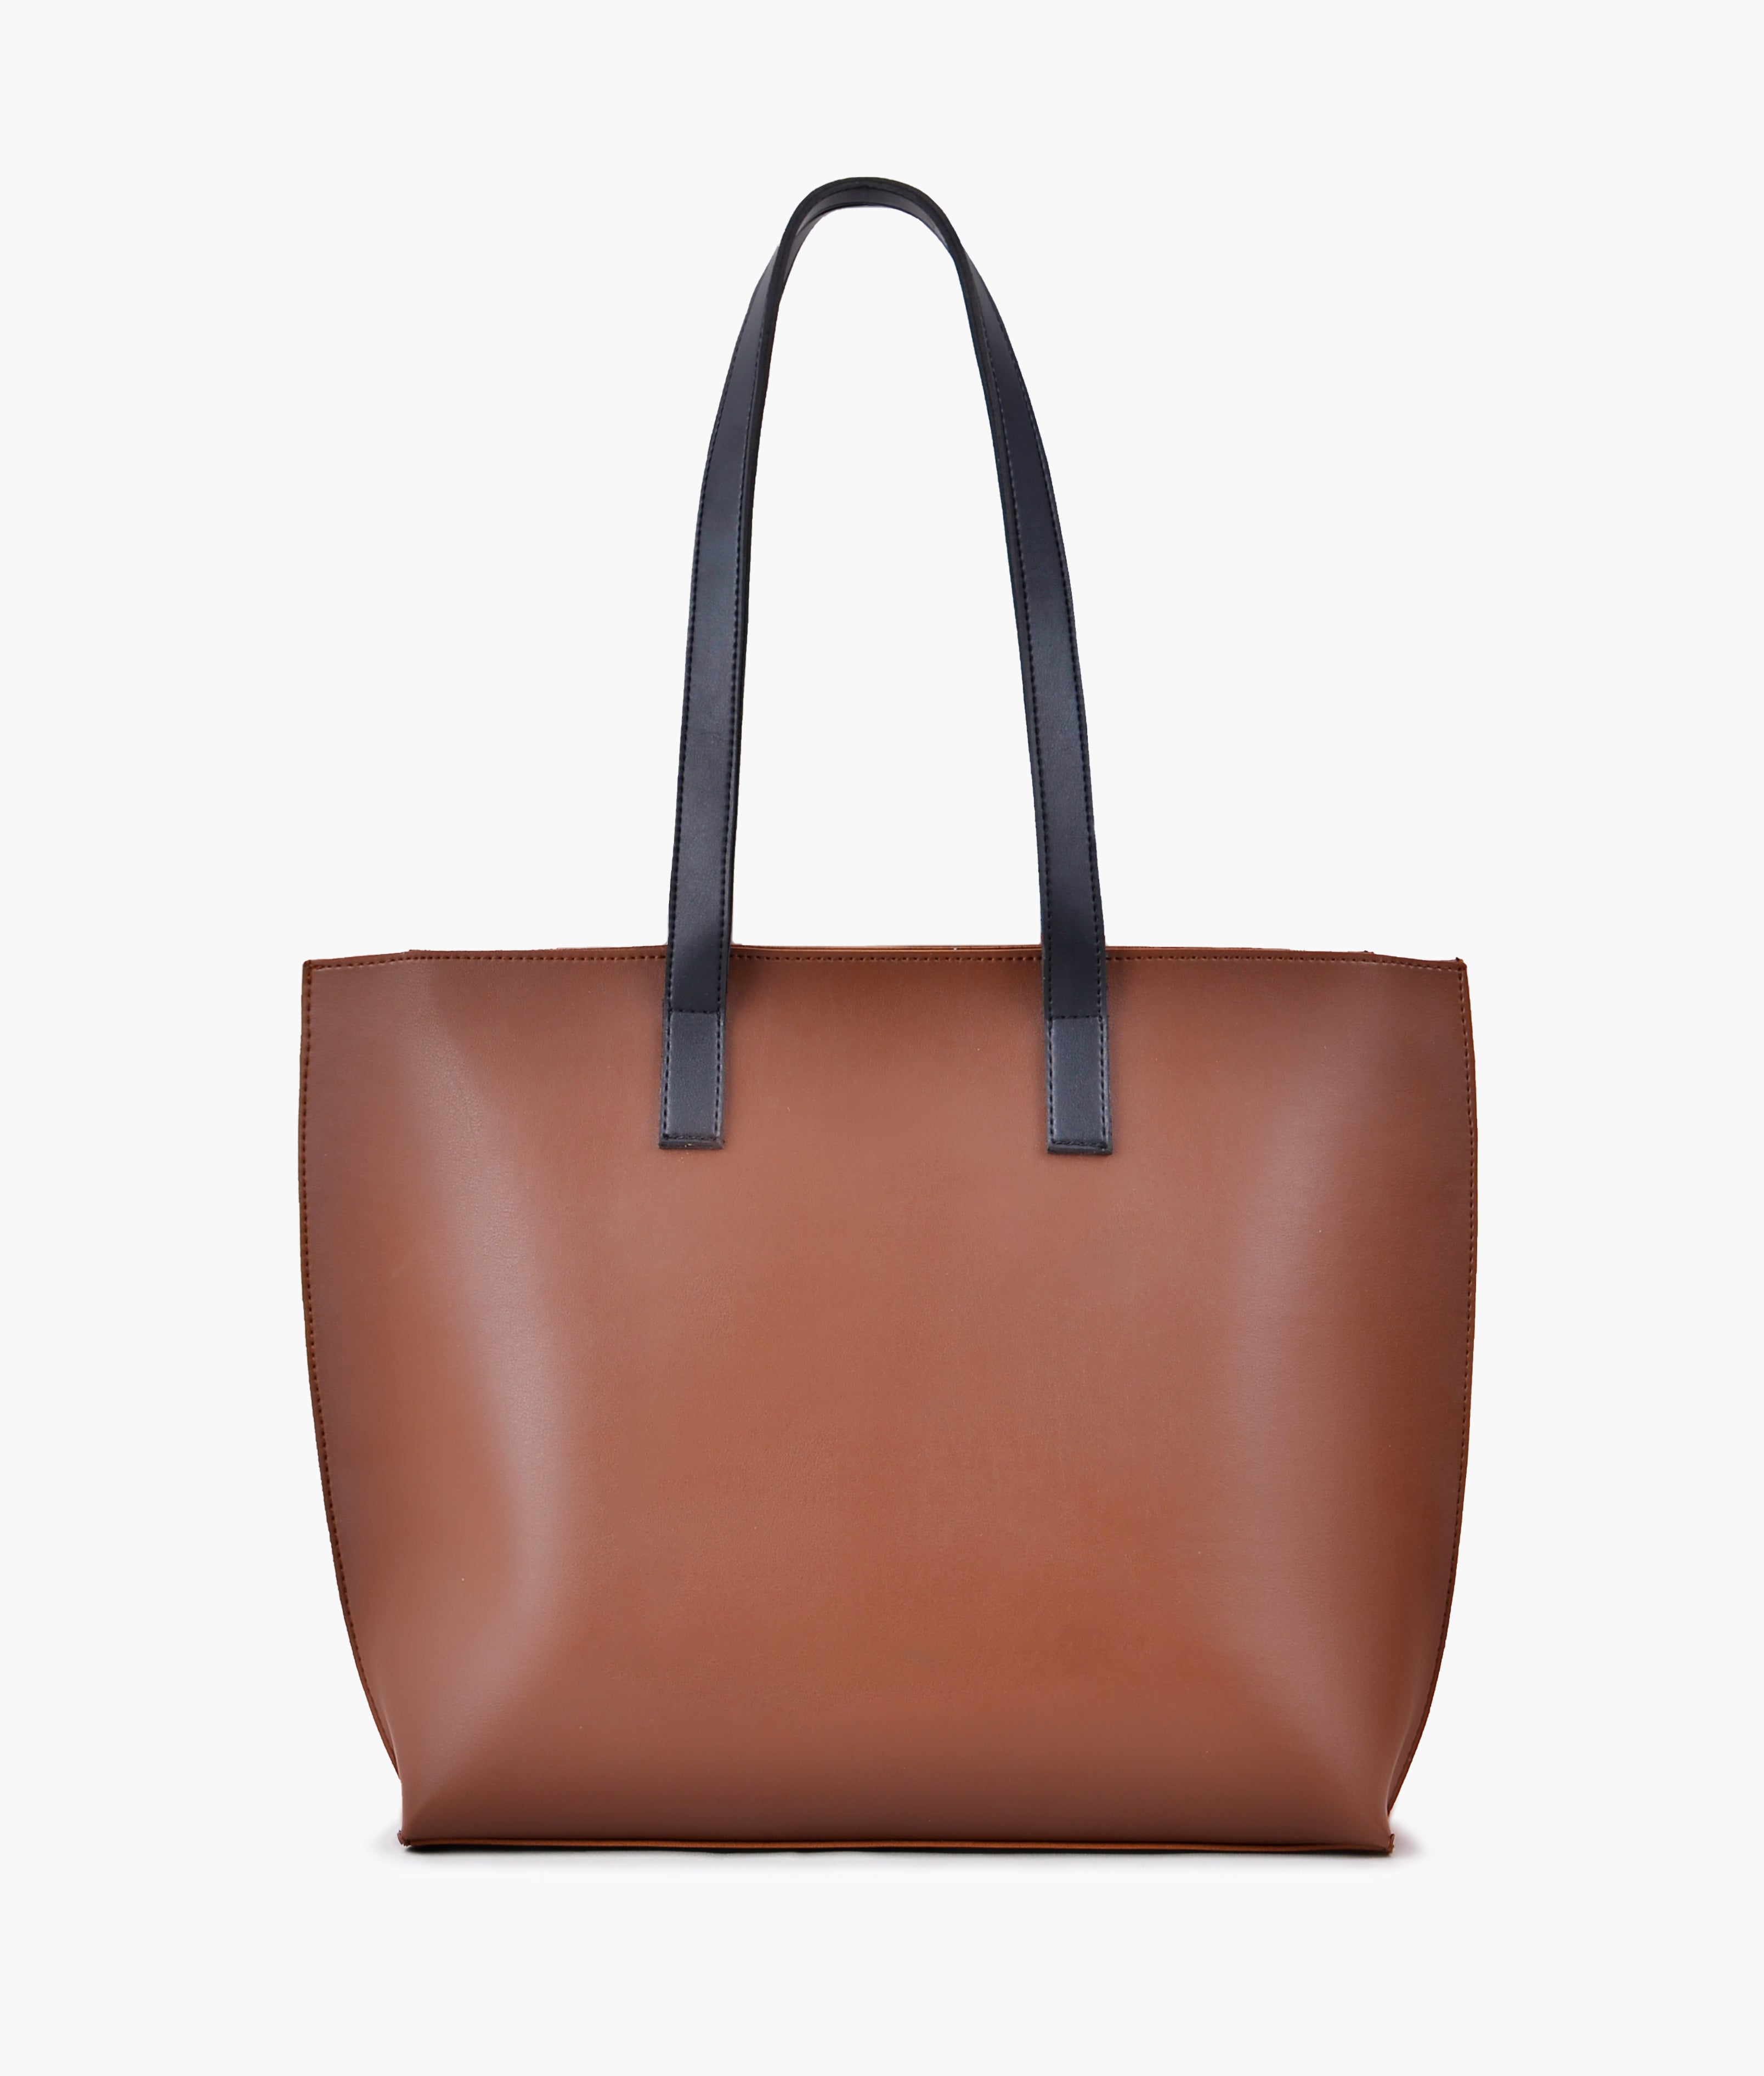 Horse brown with black long handle tote bag